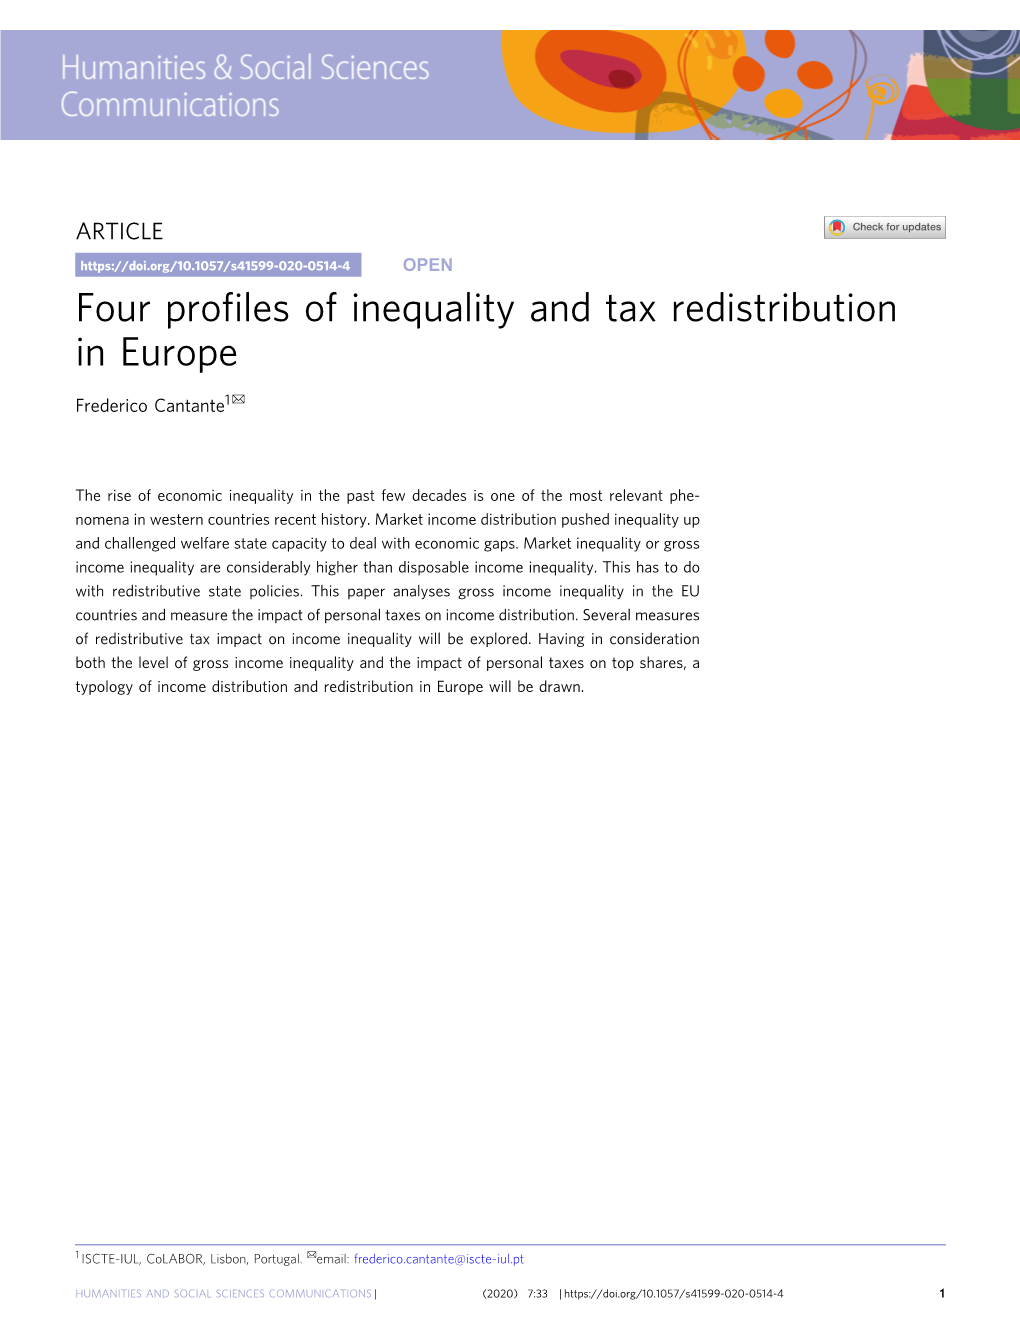 Four Profiles of Inequality and Tax Redistribution in Europe